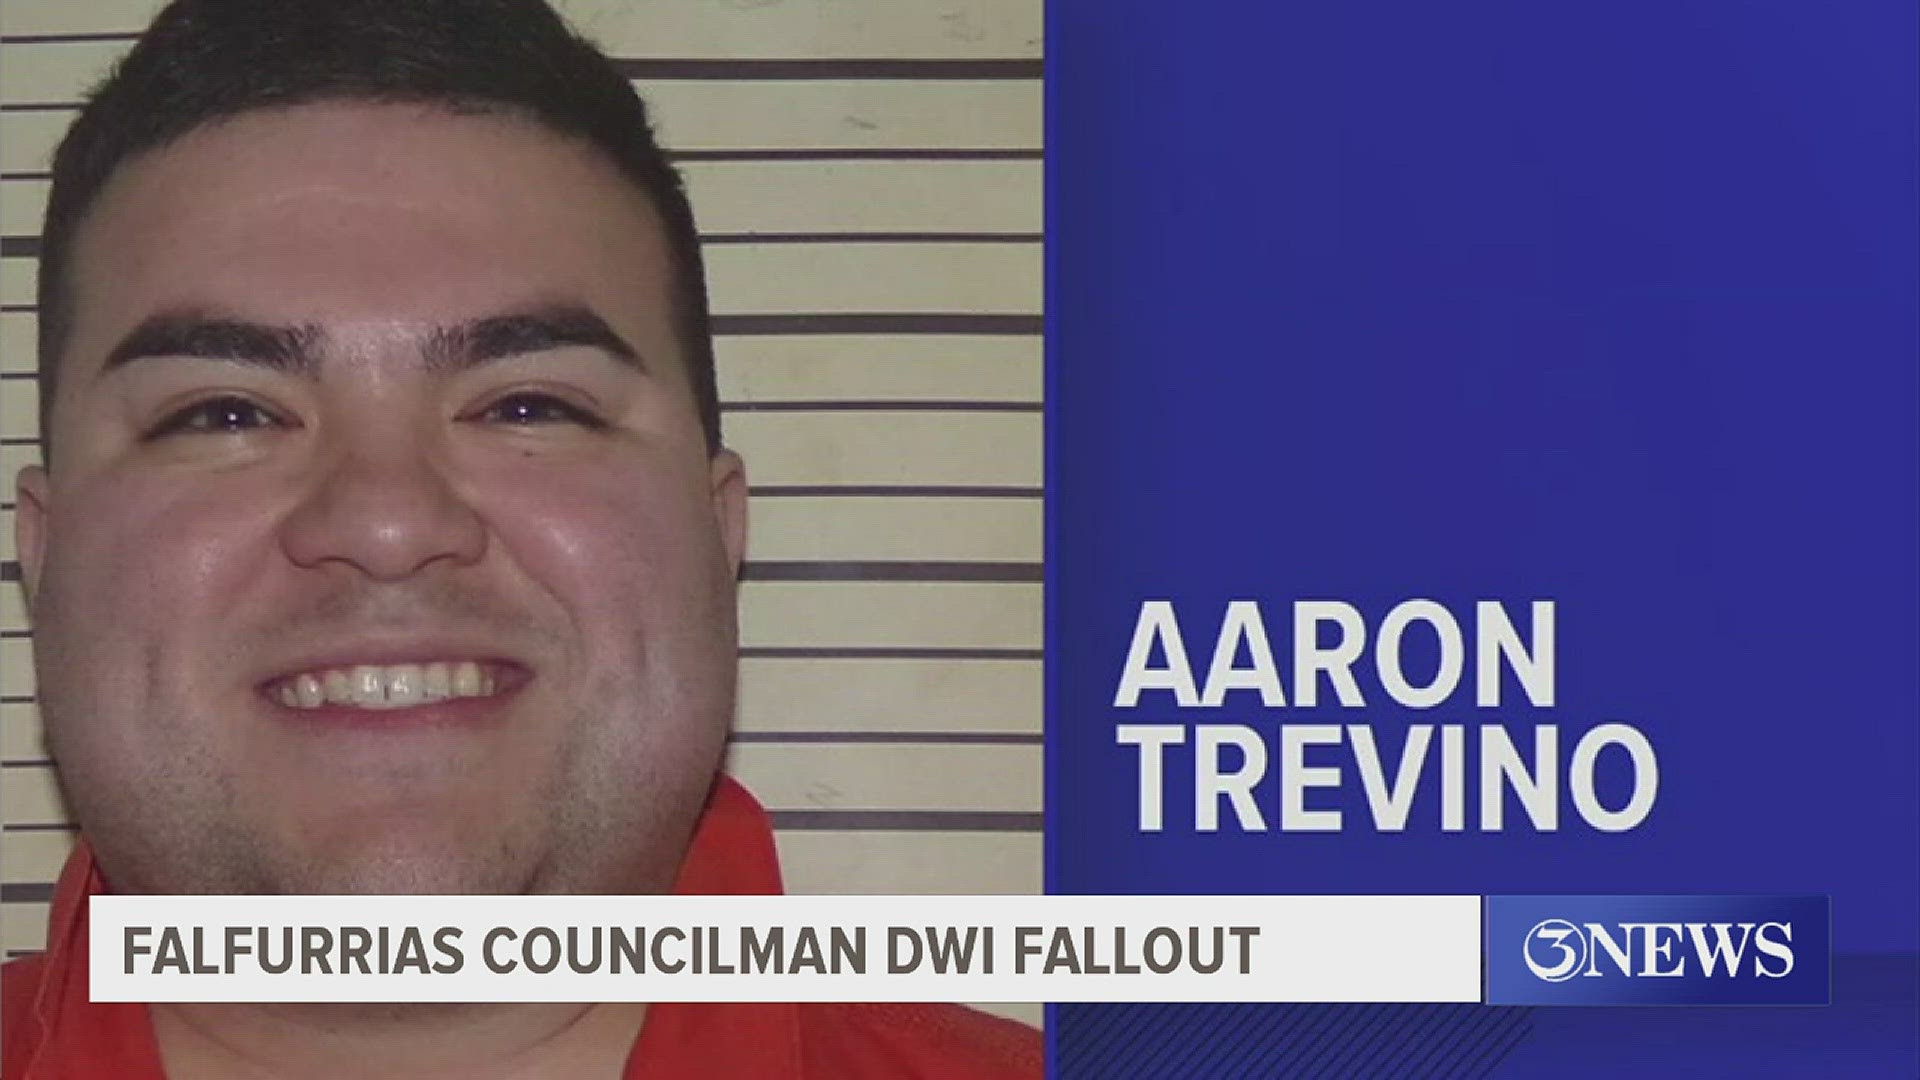 Trevino told 3NEWS he did not know he failed a drug test and is now seeking legal council.